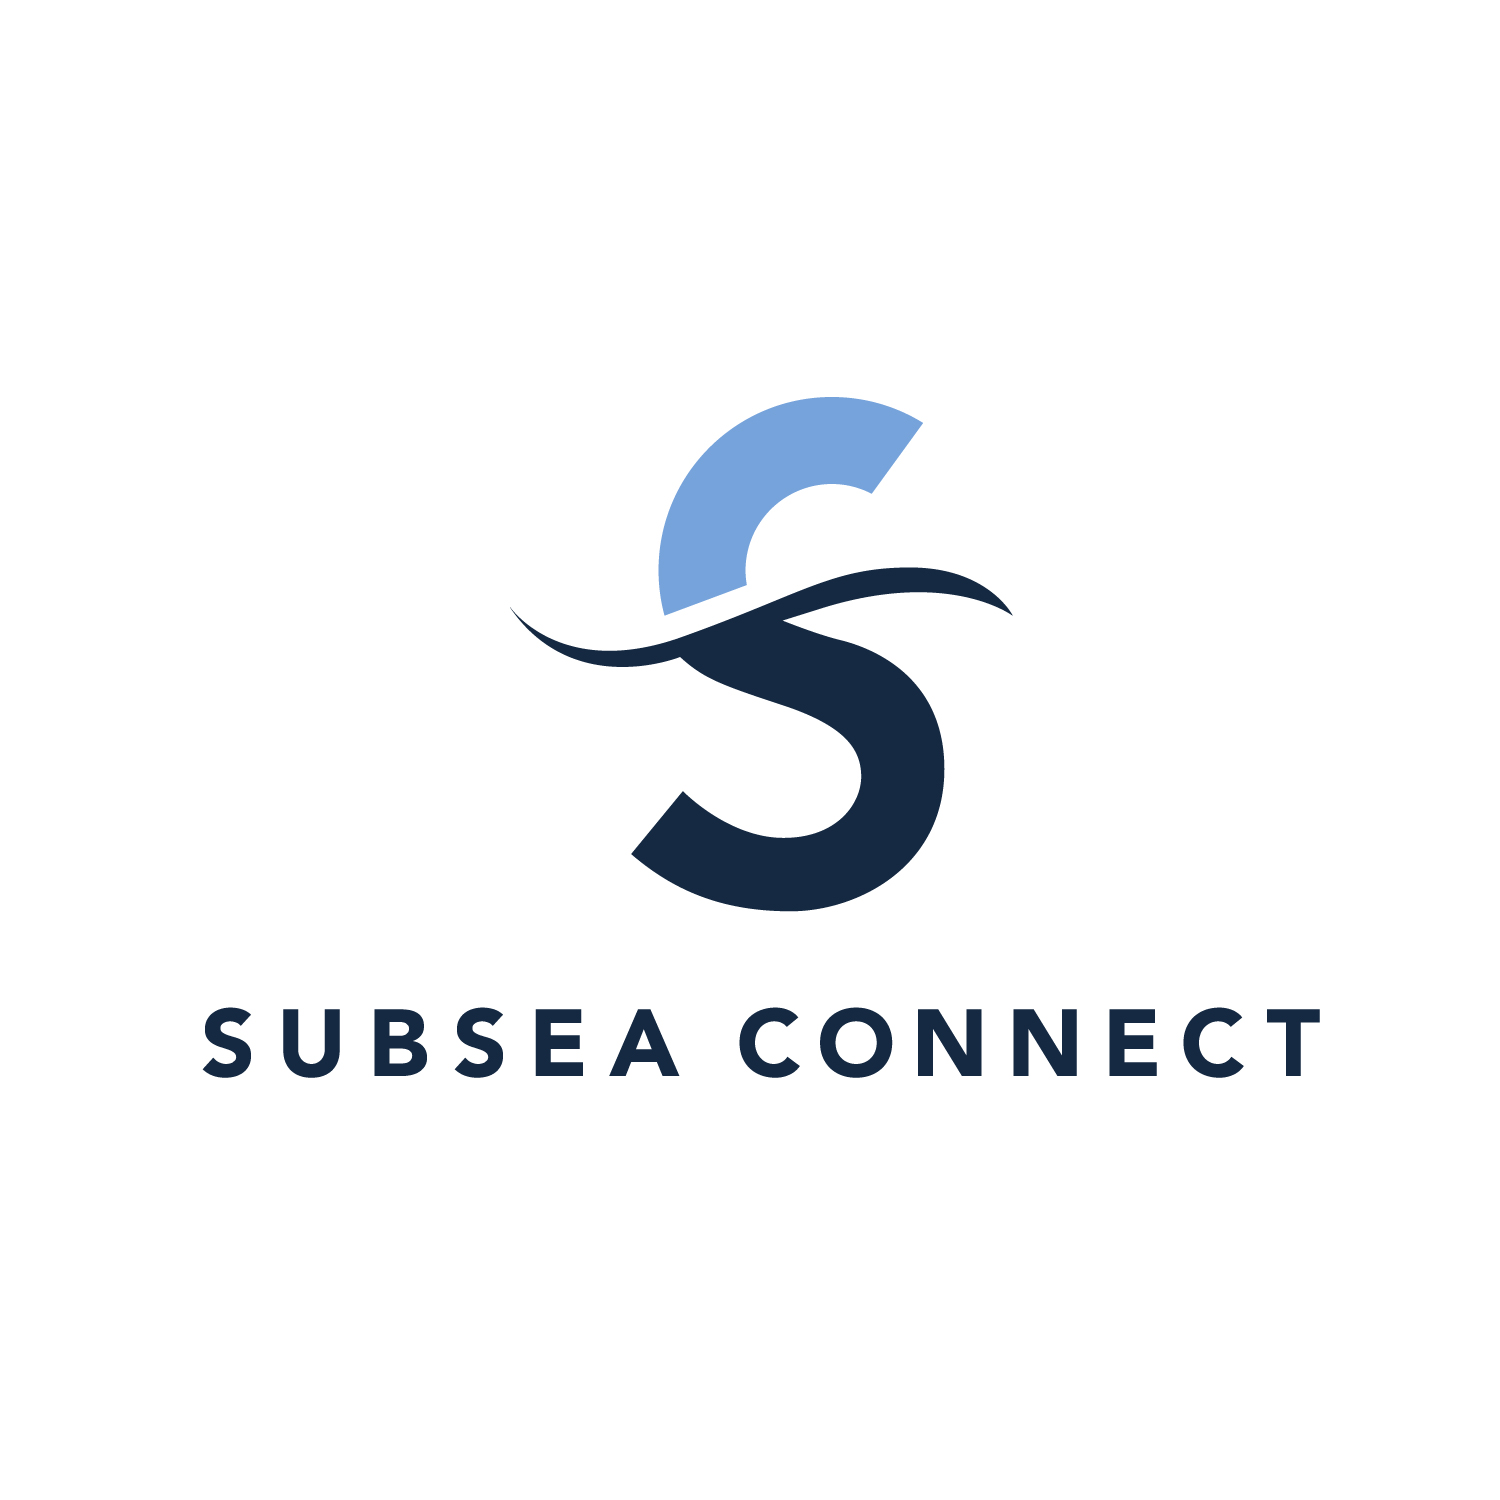 Subsea Connect